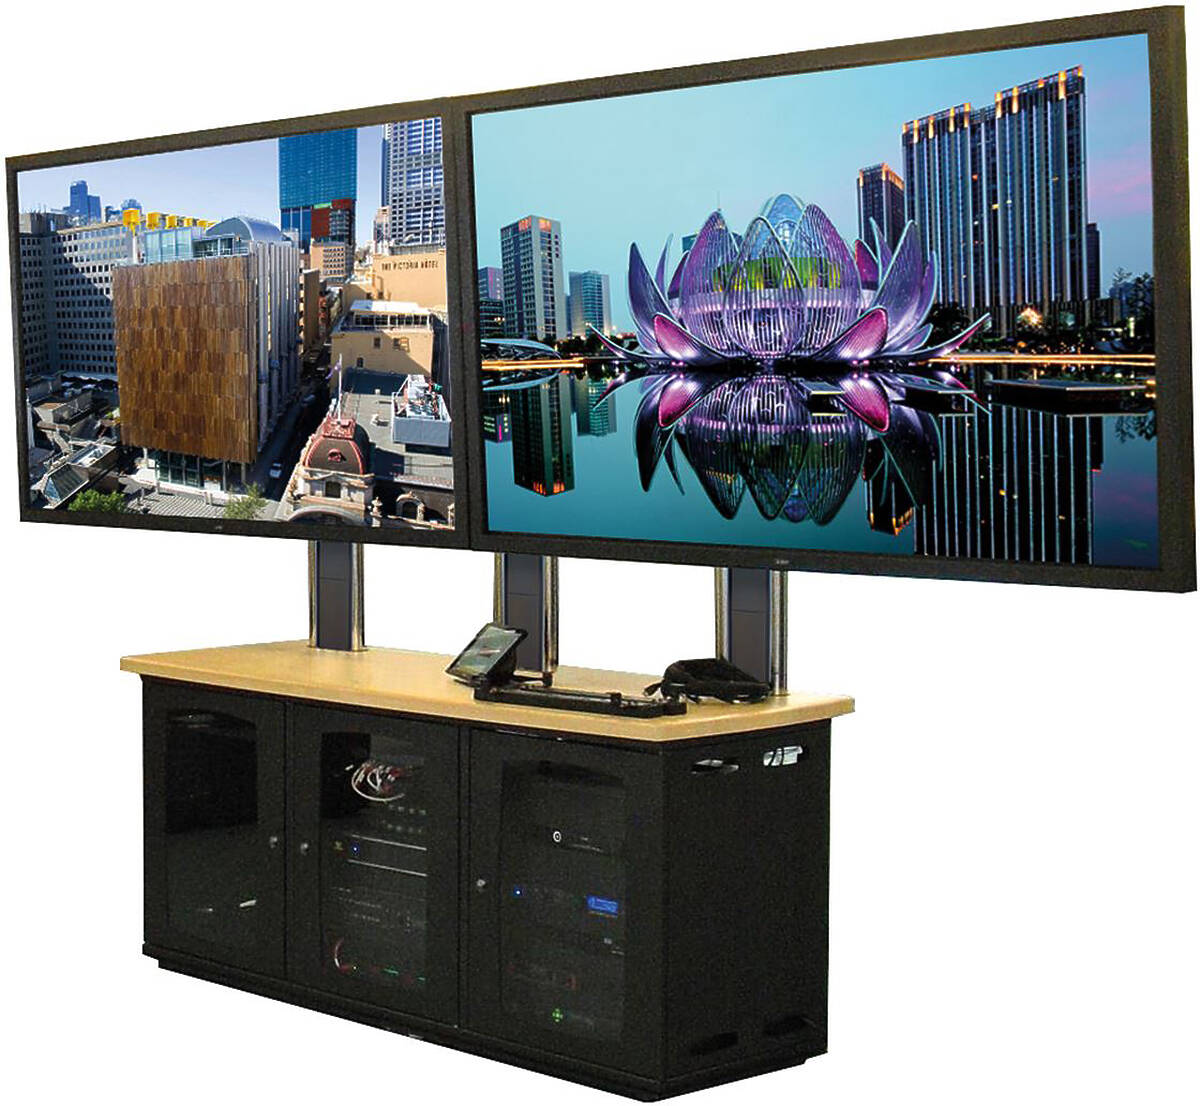 Unicol AVRHD3 Dual heavy duty display unit with triple 19" cabinet credenza product image. Click to enlarge.